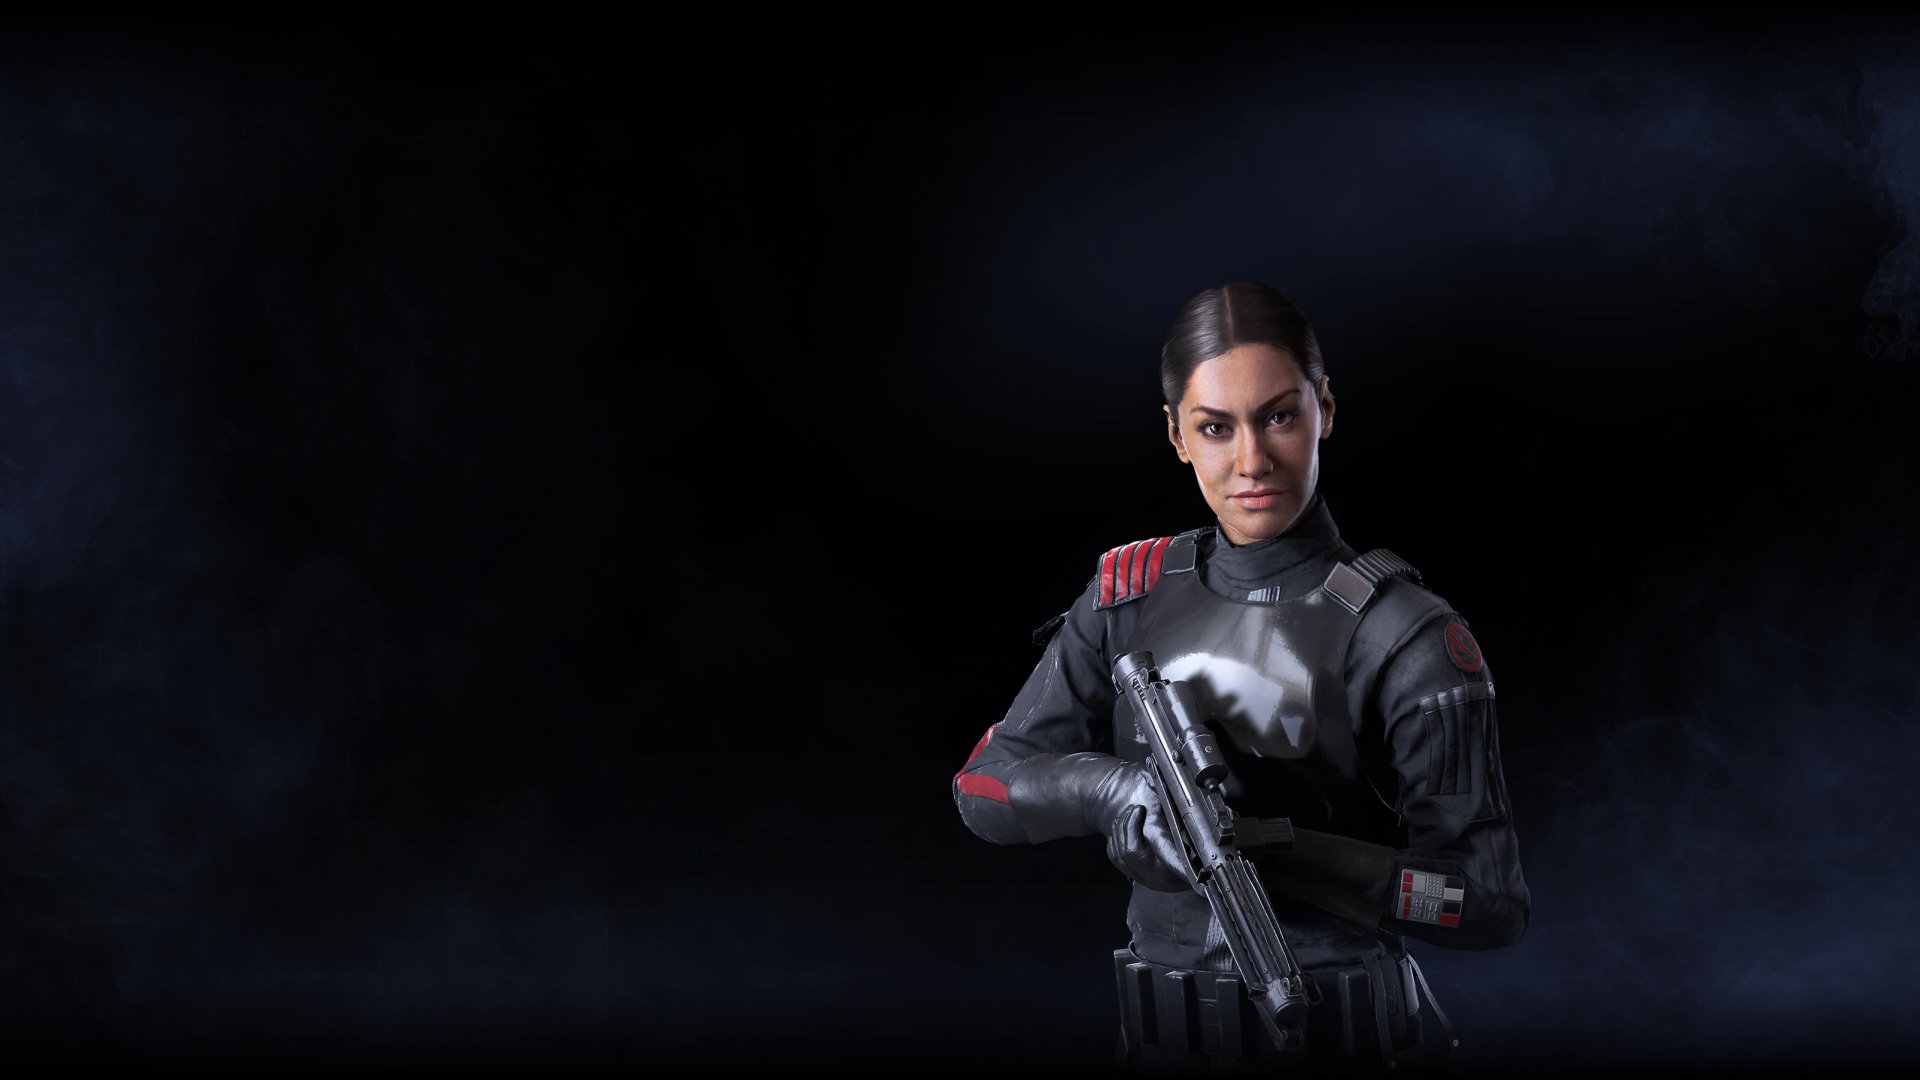 4K Ultra HD Iden Versio Wallpaper and Background Image